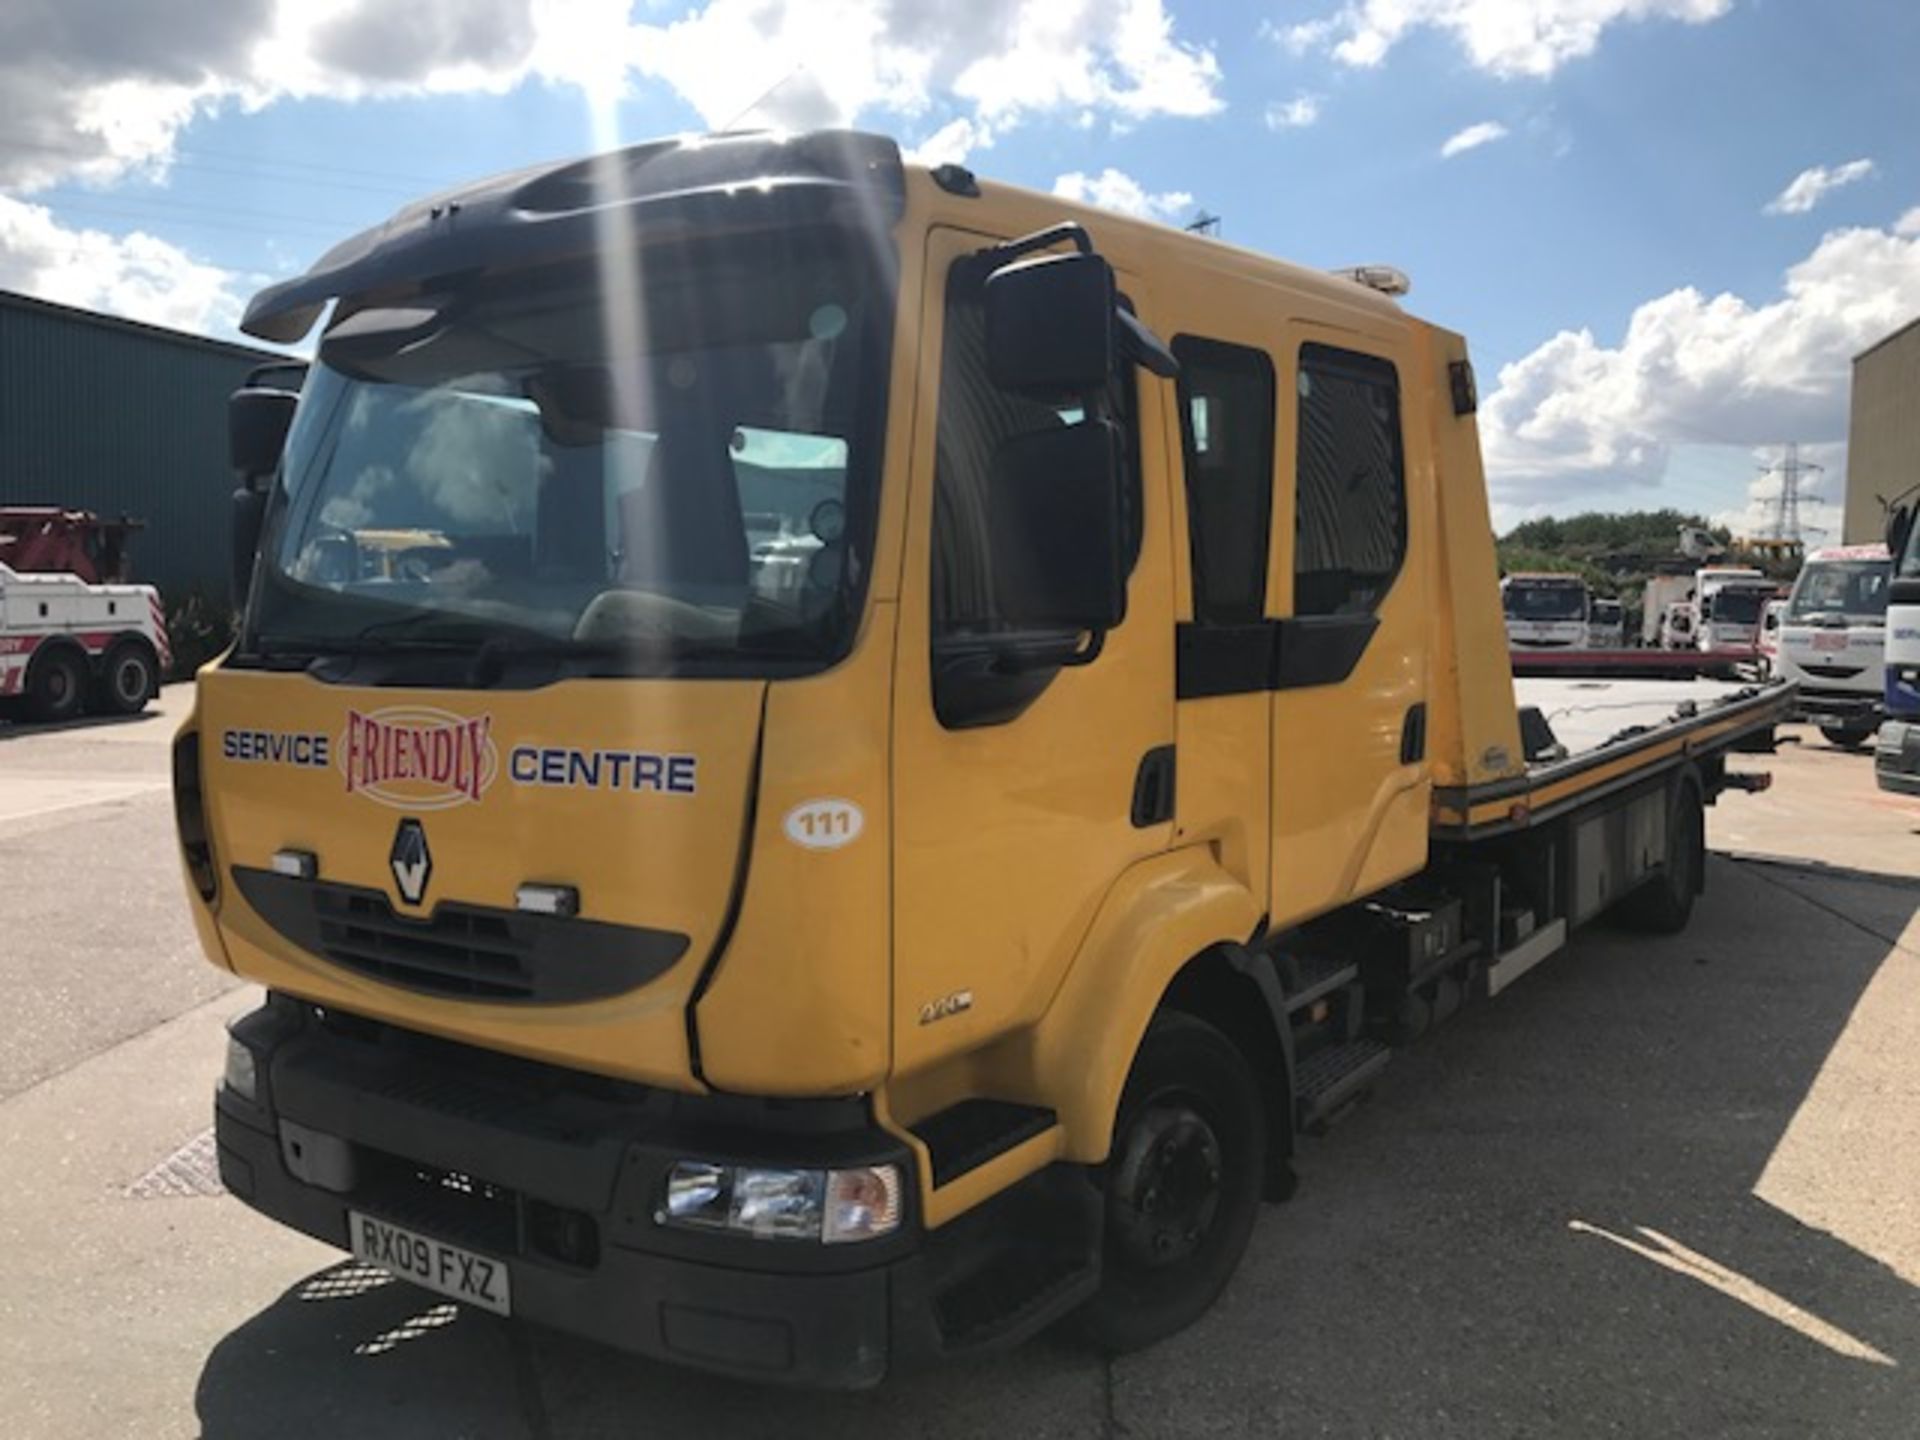 2009 Renault Midlum 12T 220 Dti crew cab breakdown recovery vehiclecomplete with spec lift, J&J - Image 3 of 16